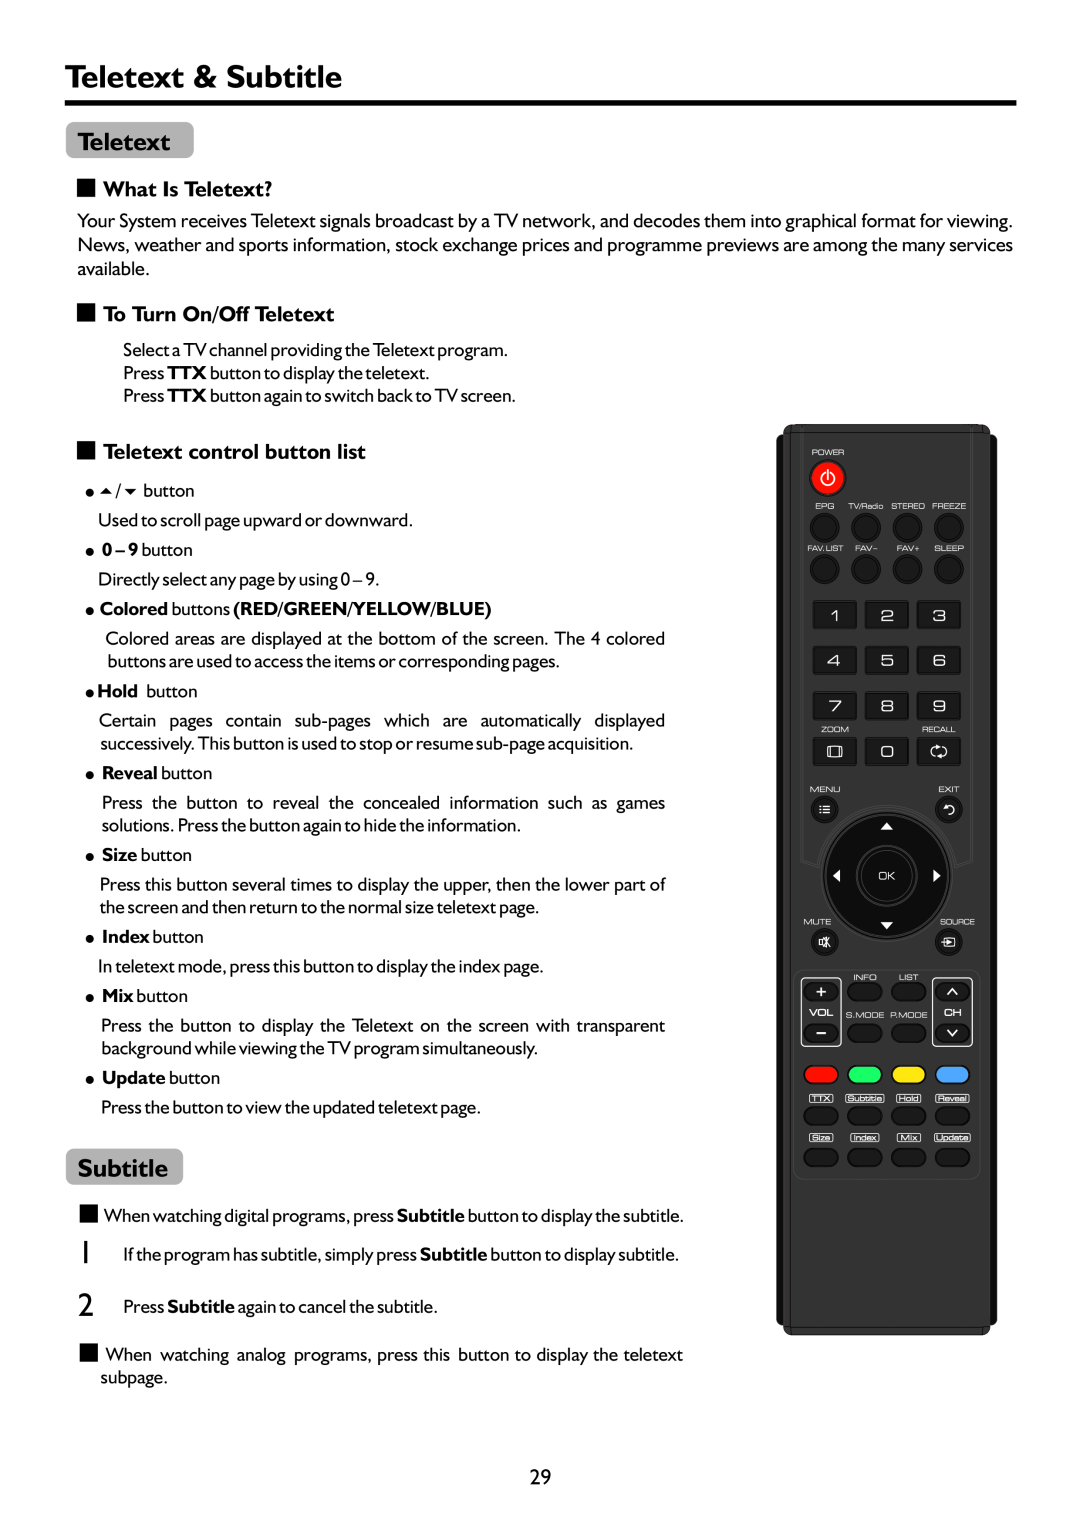 Palsonic TFTV4200FHD Teletext & Subtitle, What Is Teletext?, To Turn On/Off Teletext, Teletext control button list 